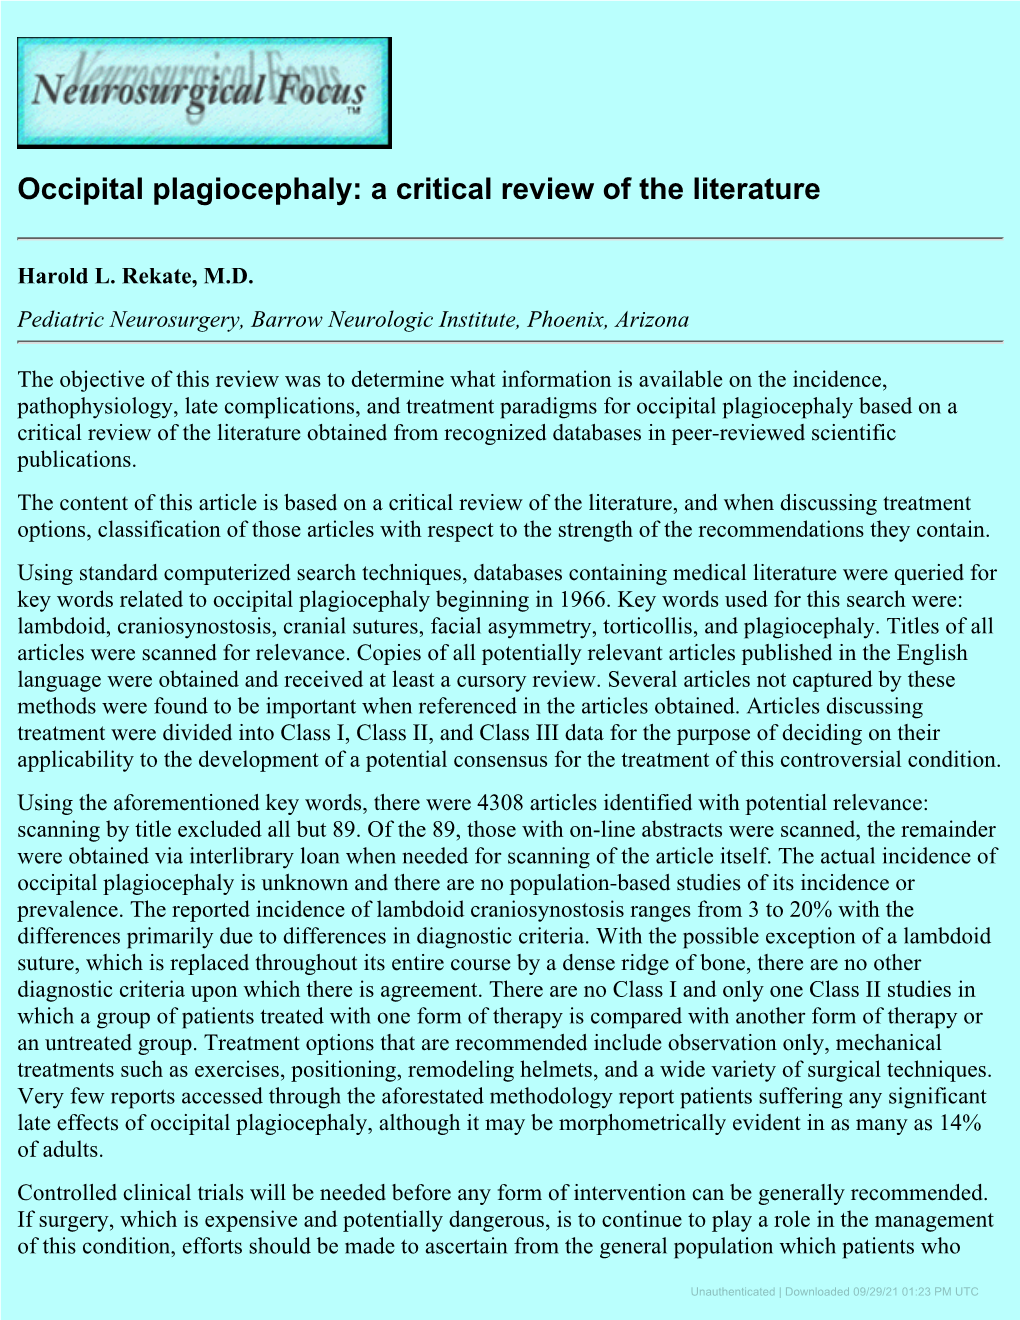 Occipital Plagiocephaly: a Critical Review of the Literature